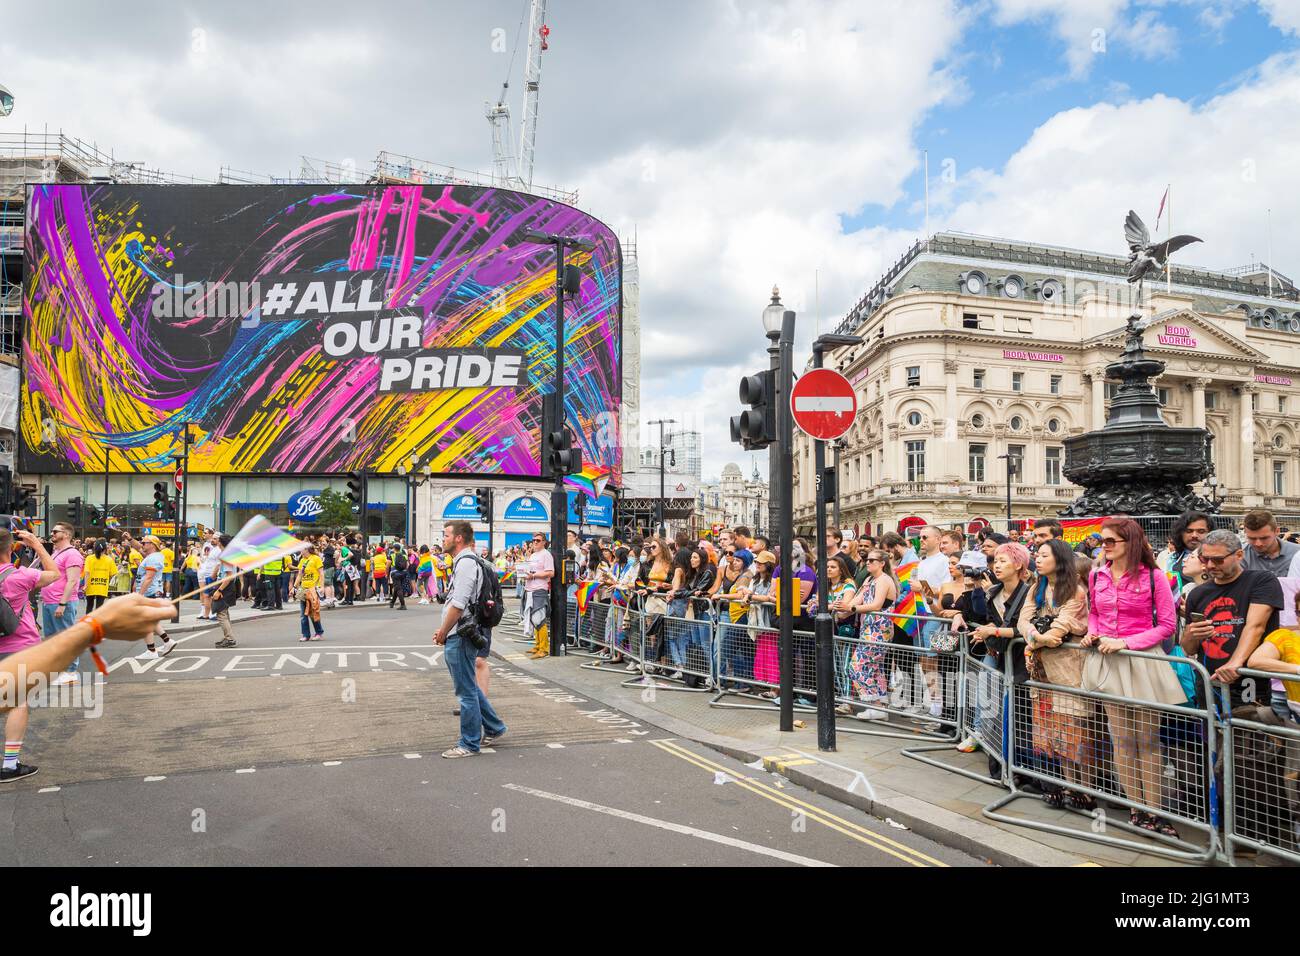 View of Piccadilly Circus Lights with Pride in London 2022 logo Stock Photo